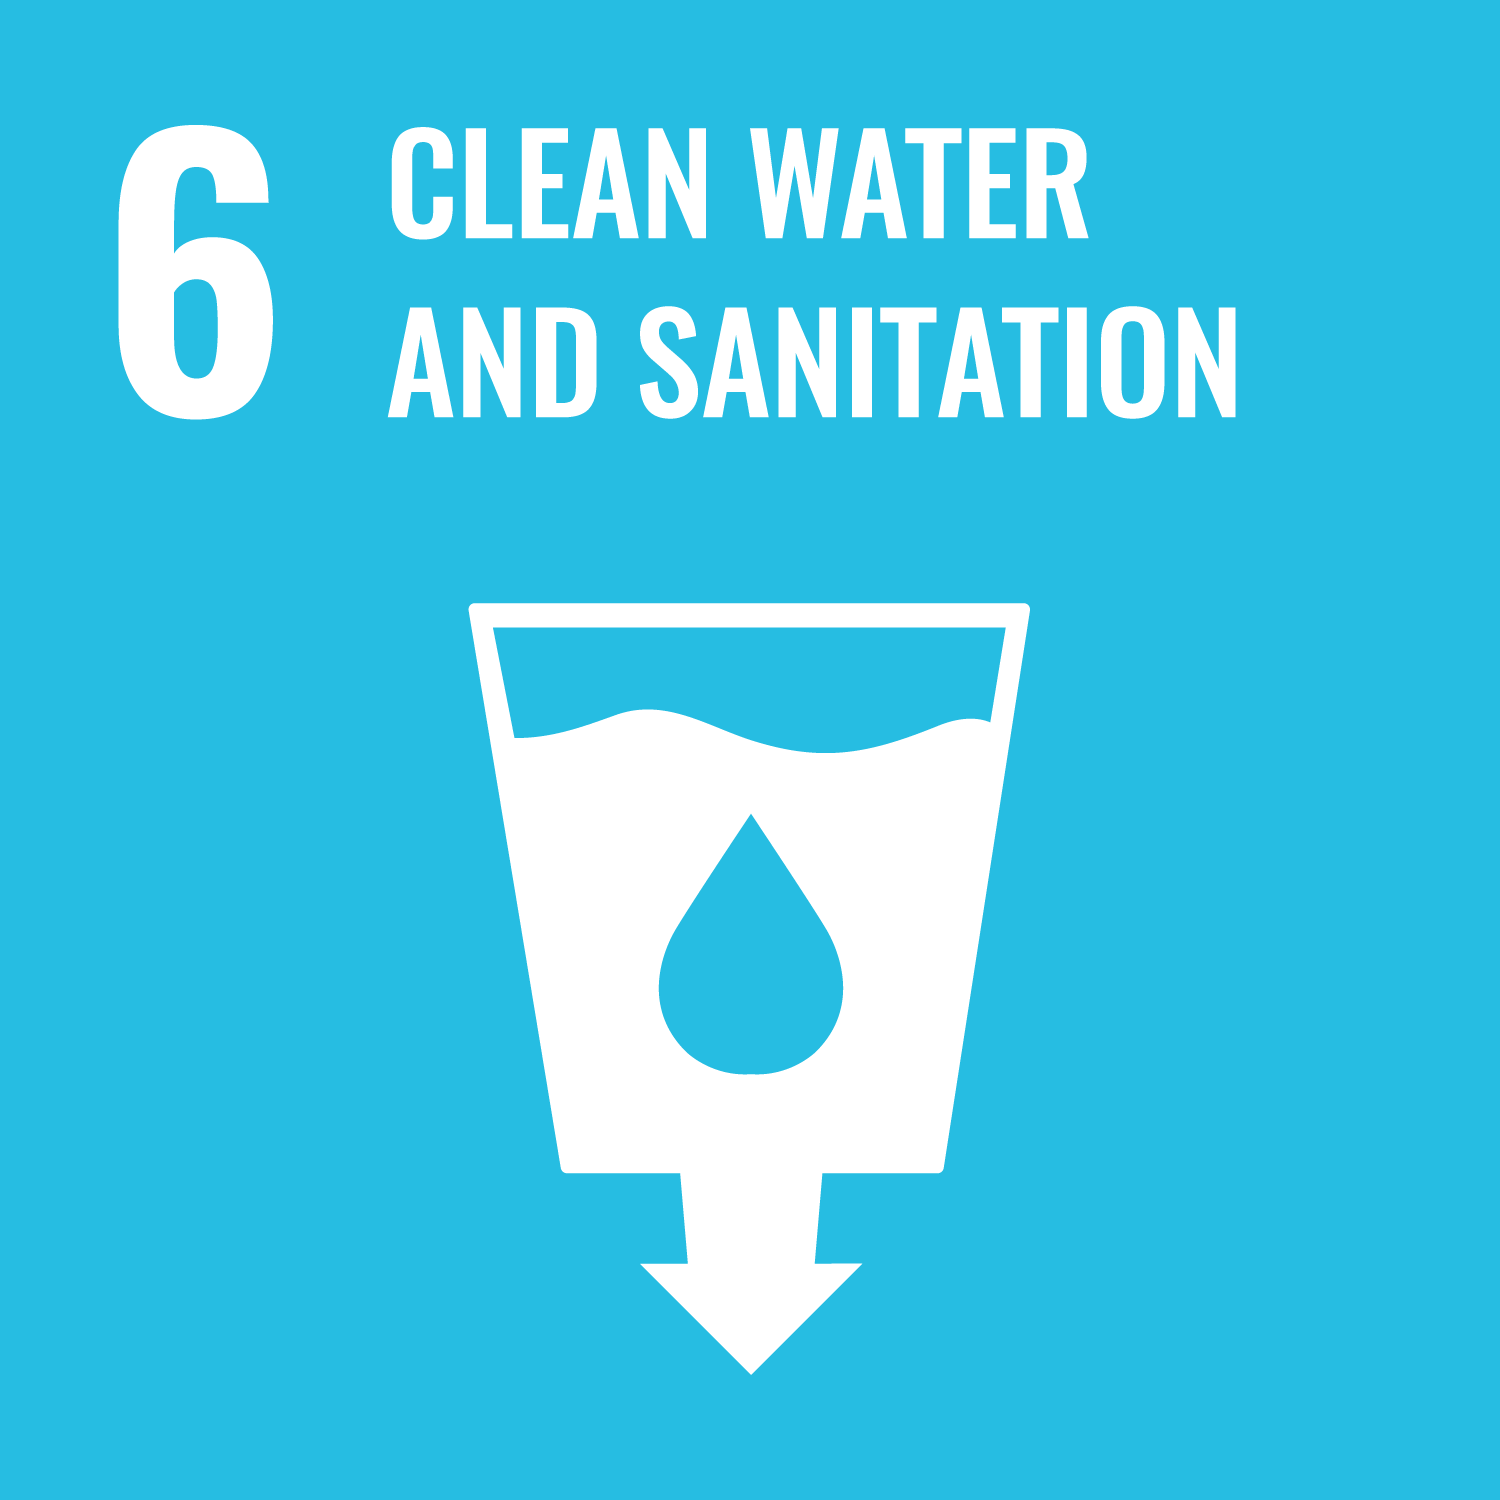 6｜CLEAN WATER AND SANITATION